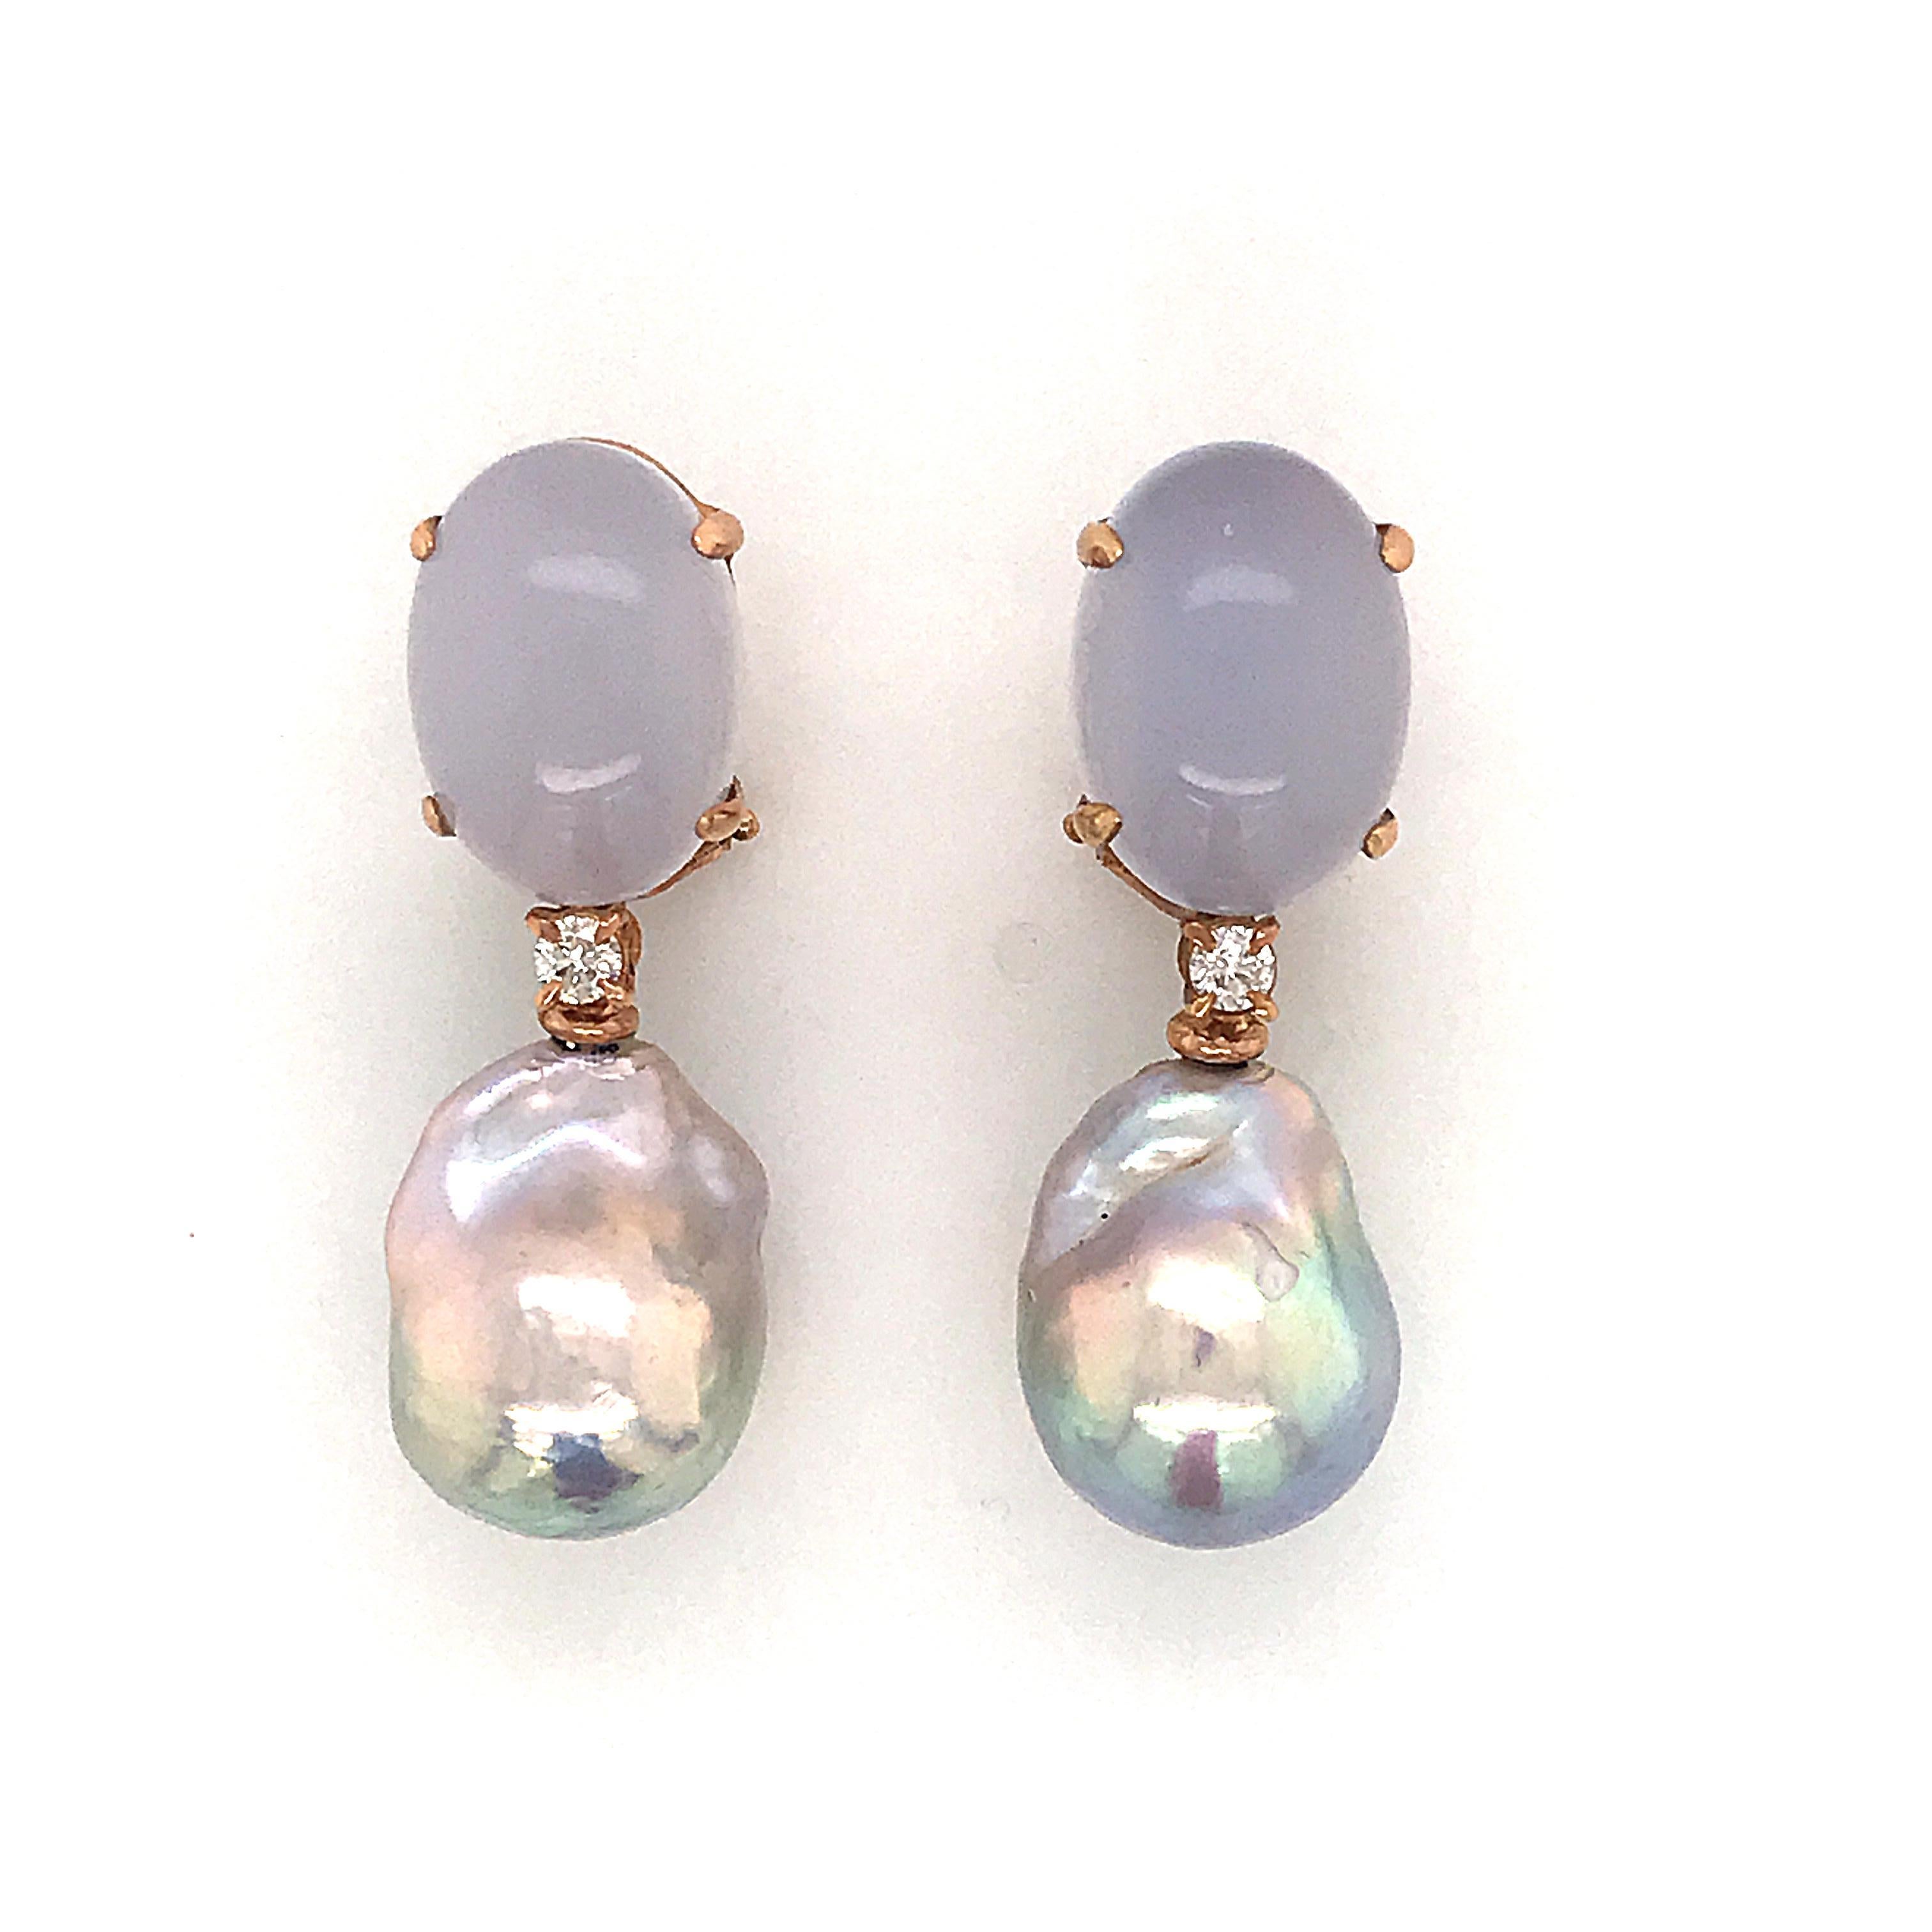 Baroque Pearl with Diamonds and Calcedony on Pink Gold 18K Dangle Earrings
2 Natural Baroque Pearl 
2 Diamonds 0.14 ct 
2 Calcedony 
Pink Gold 18 KT Weight / 5 grams